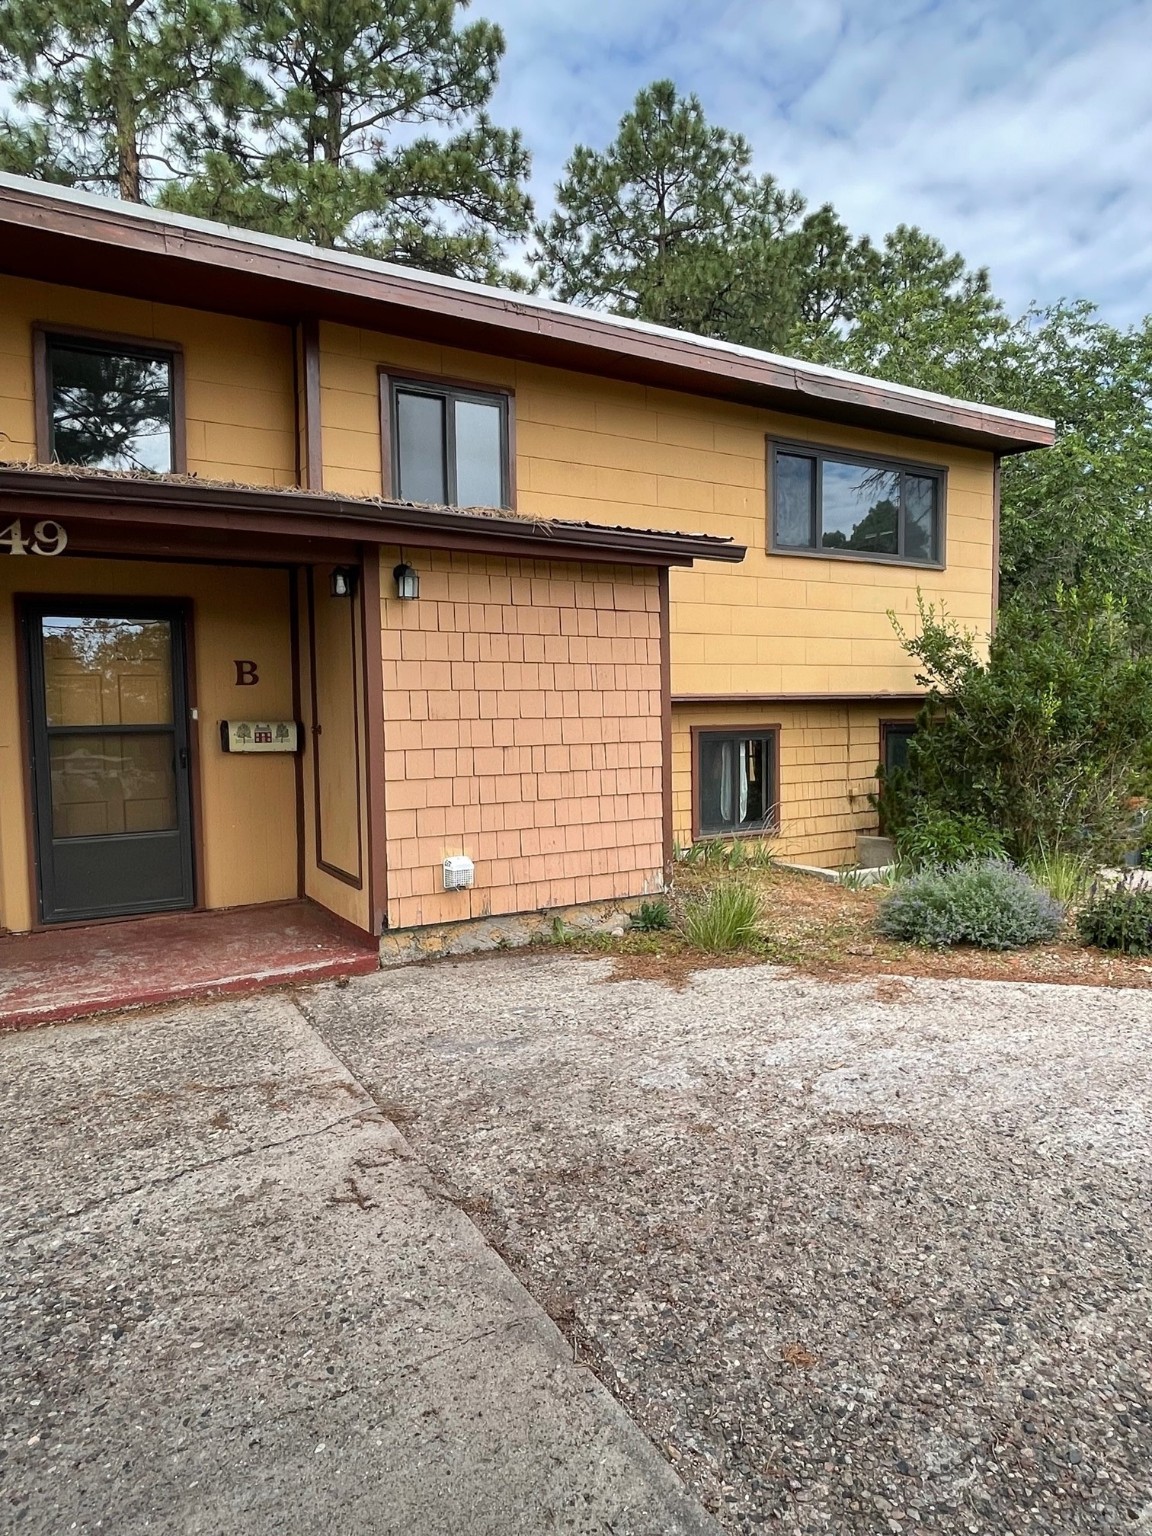 2249 38th B, Los Alamos, New Mexico 87544, 3 Bedrooms Bedrooms, ,2 BathroomsBathrooms,Residential,For Sale,2249 38th B,202232577